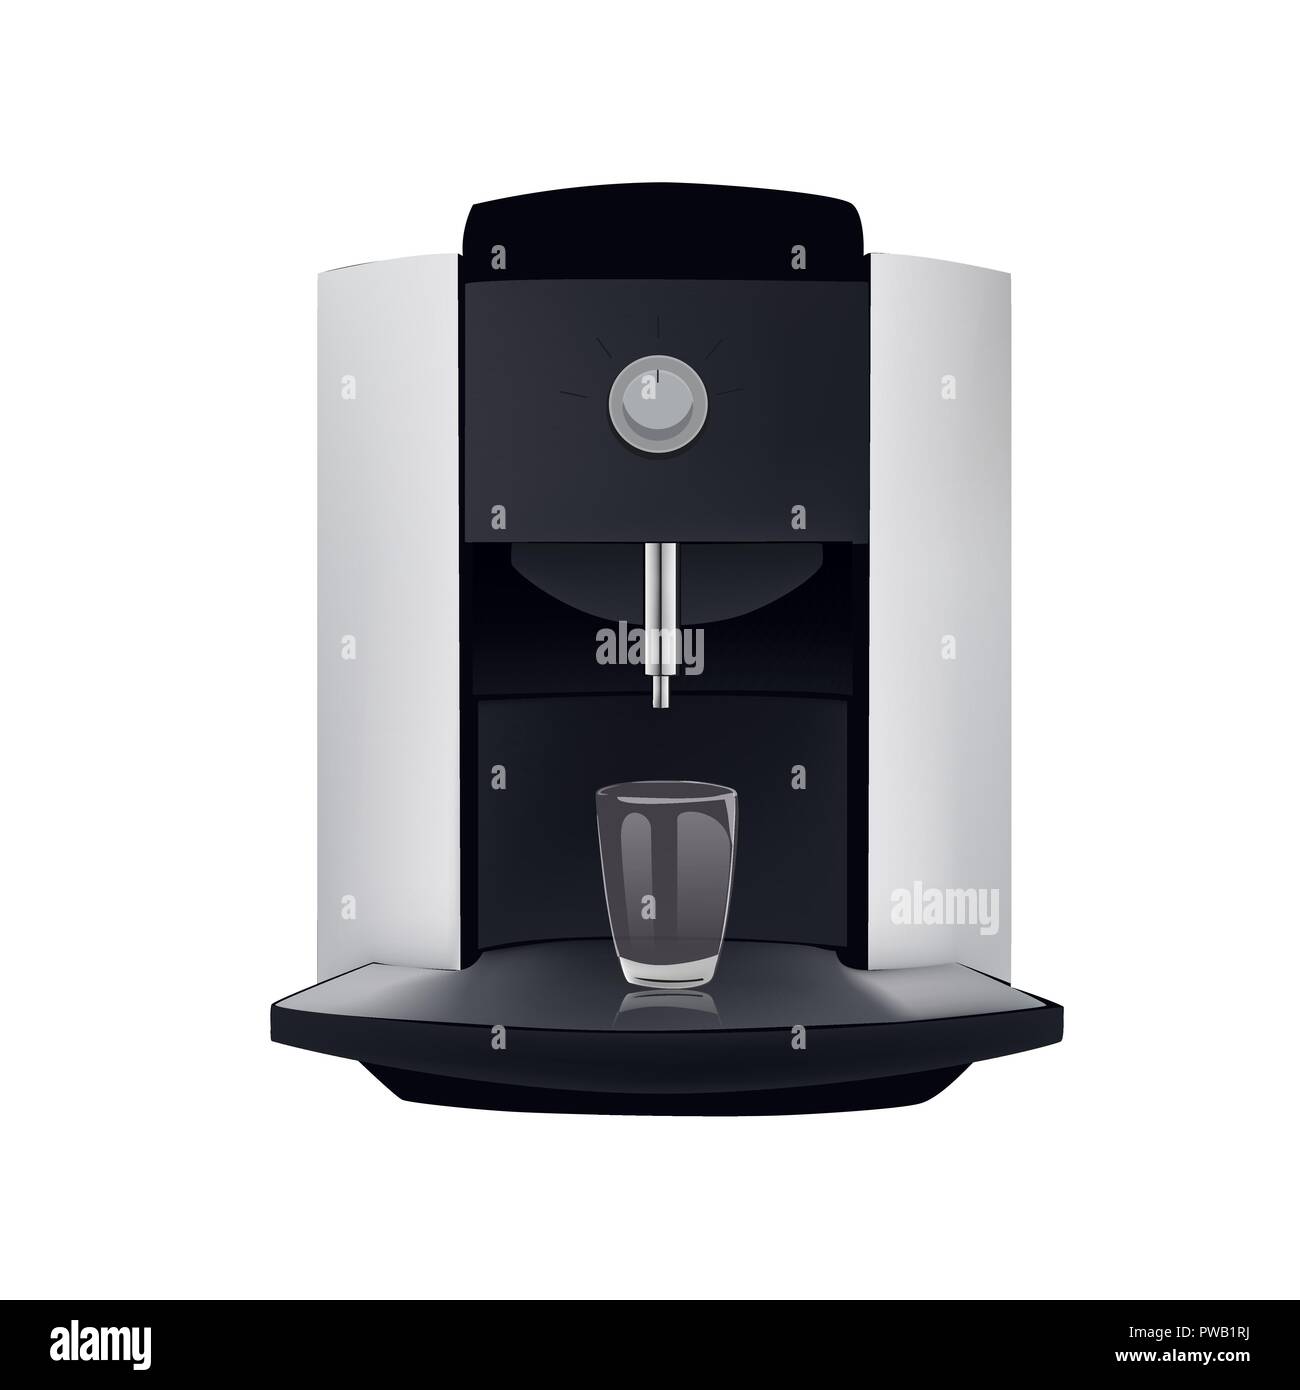 https://c8.alamy.com/comp/PWB1RJ/coffee-machine-and-glass-isolated-on-white-background-appliance-for-making-different-coffee-beverages-PWB1RJ.jpg